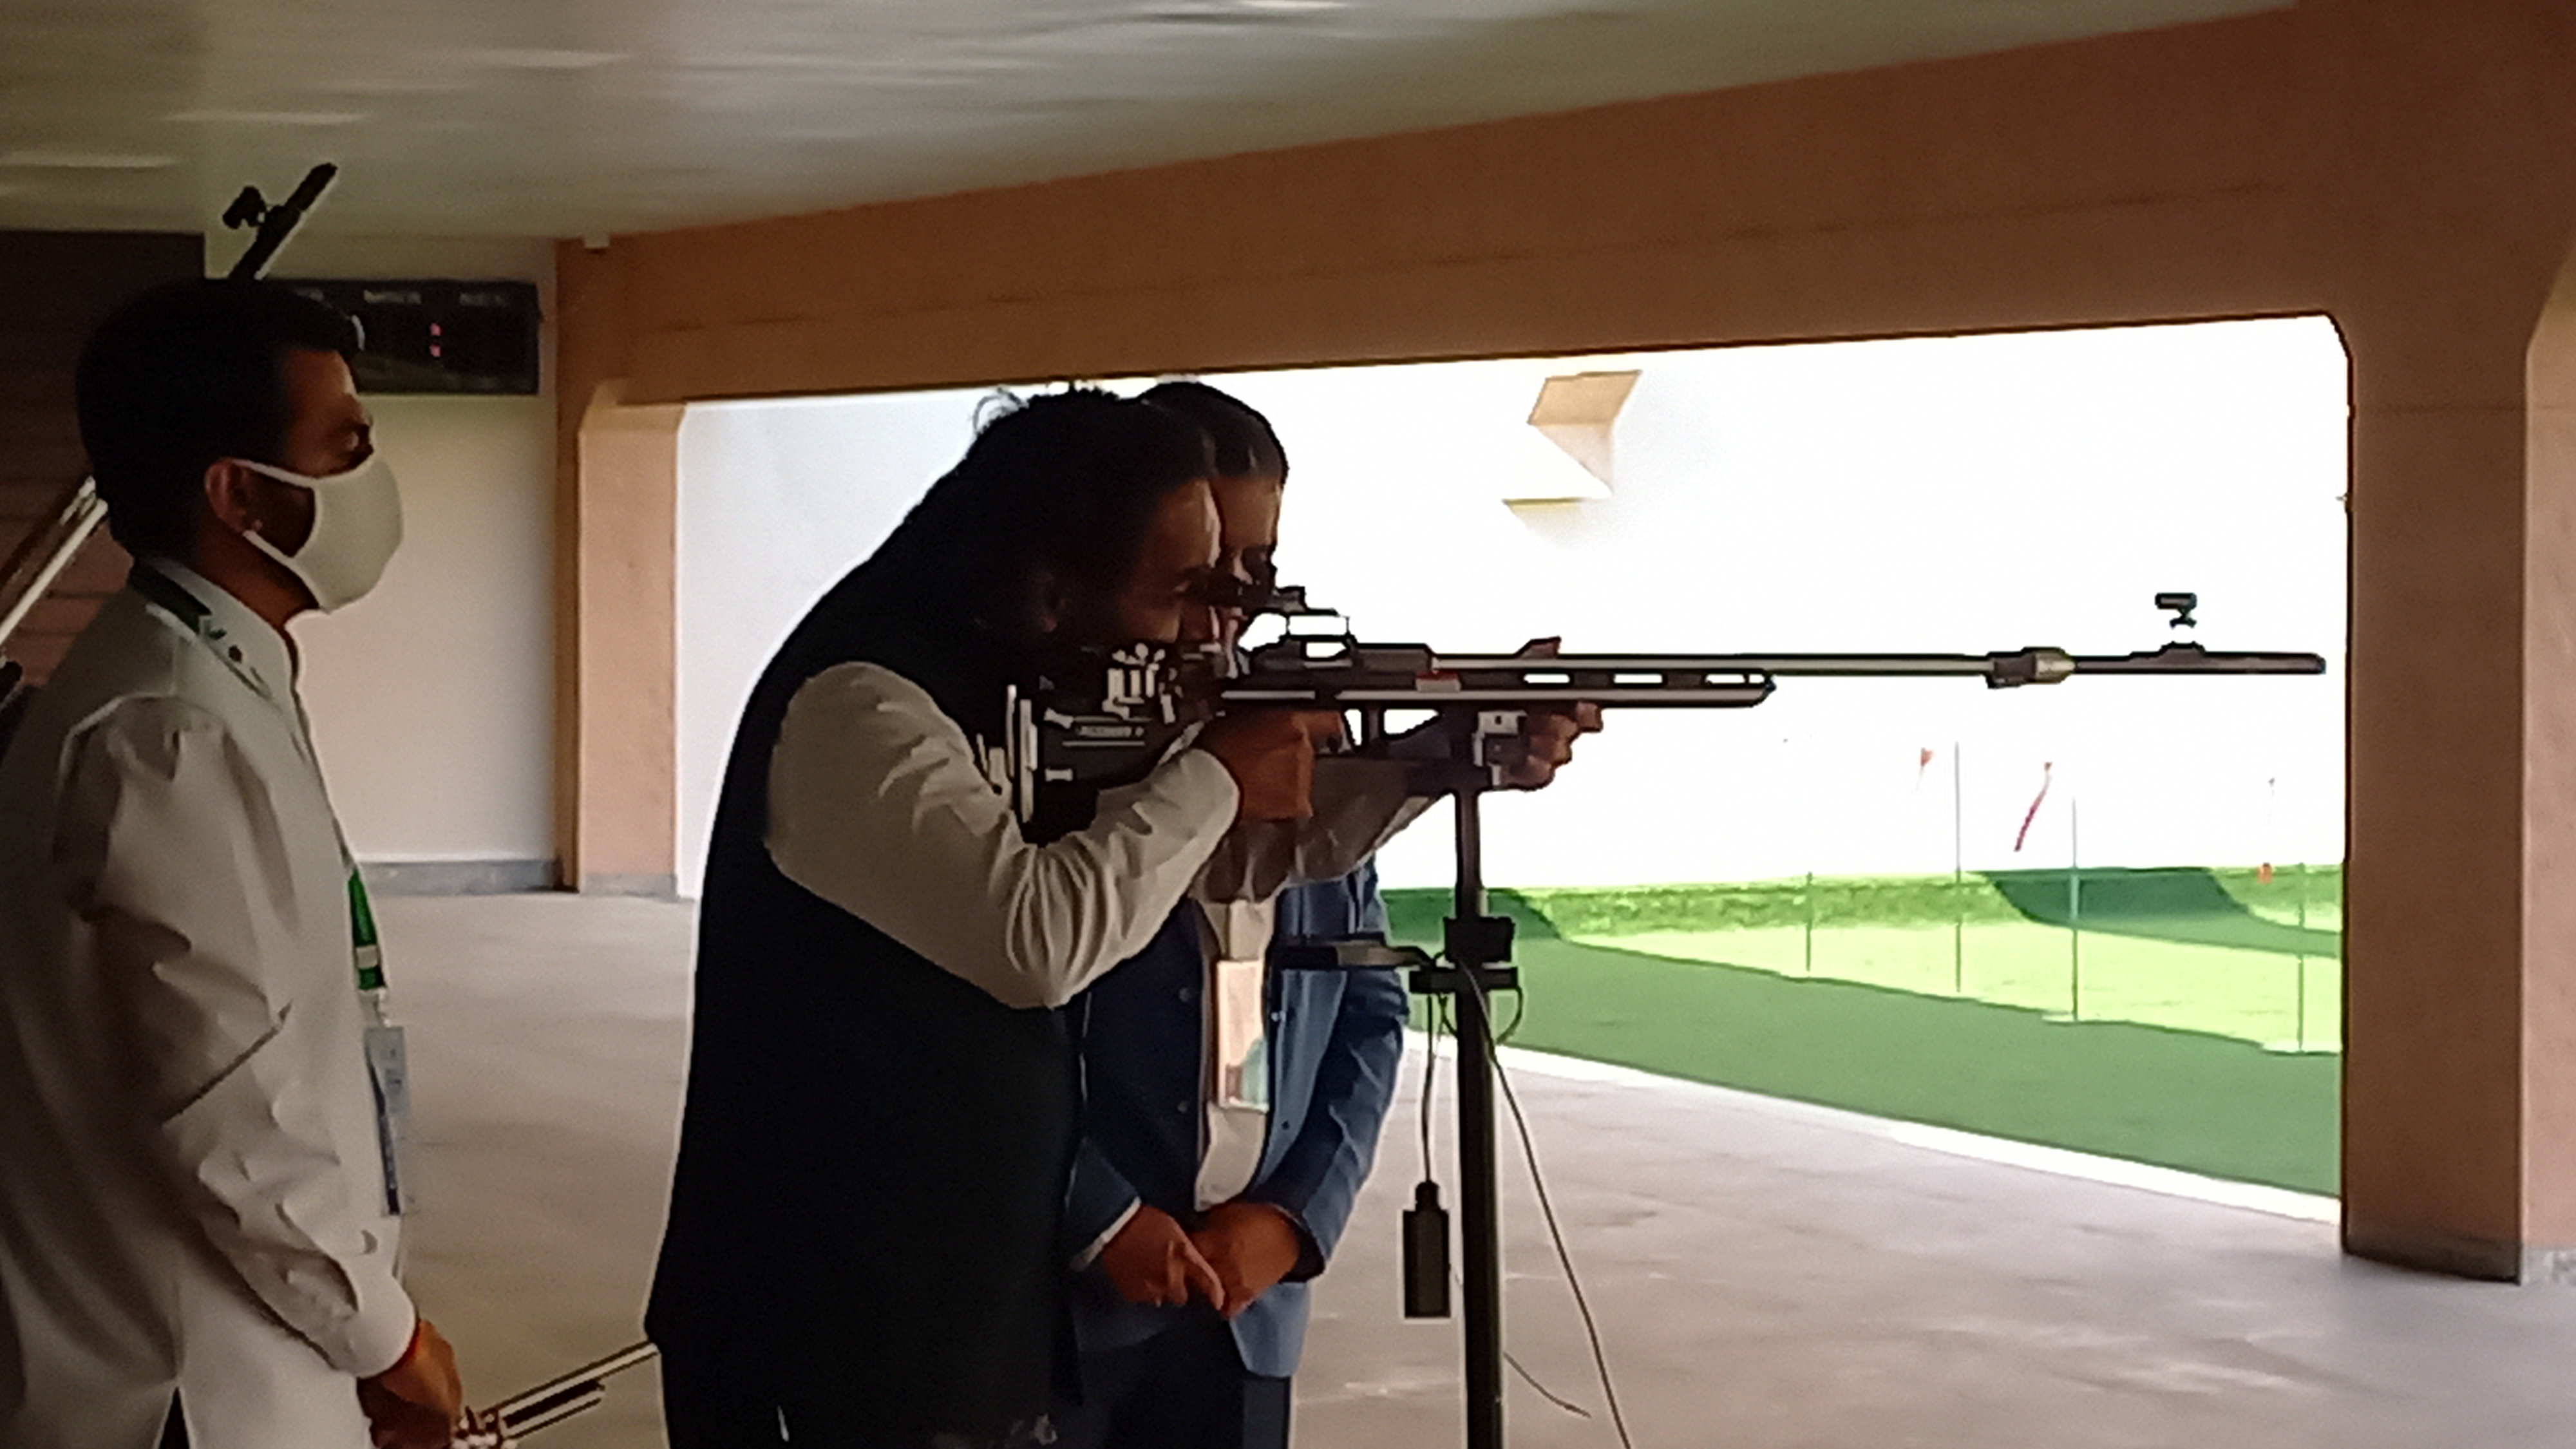 64th national shooting championship begins sports complex mp